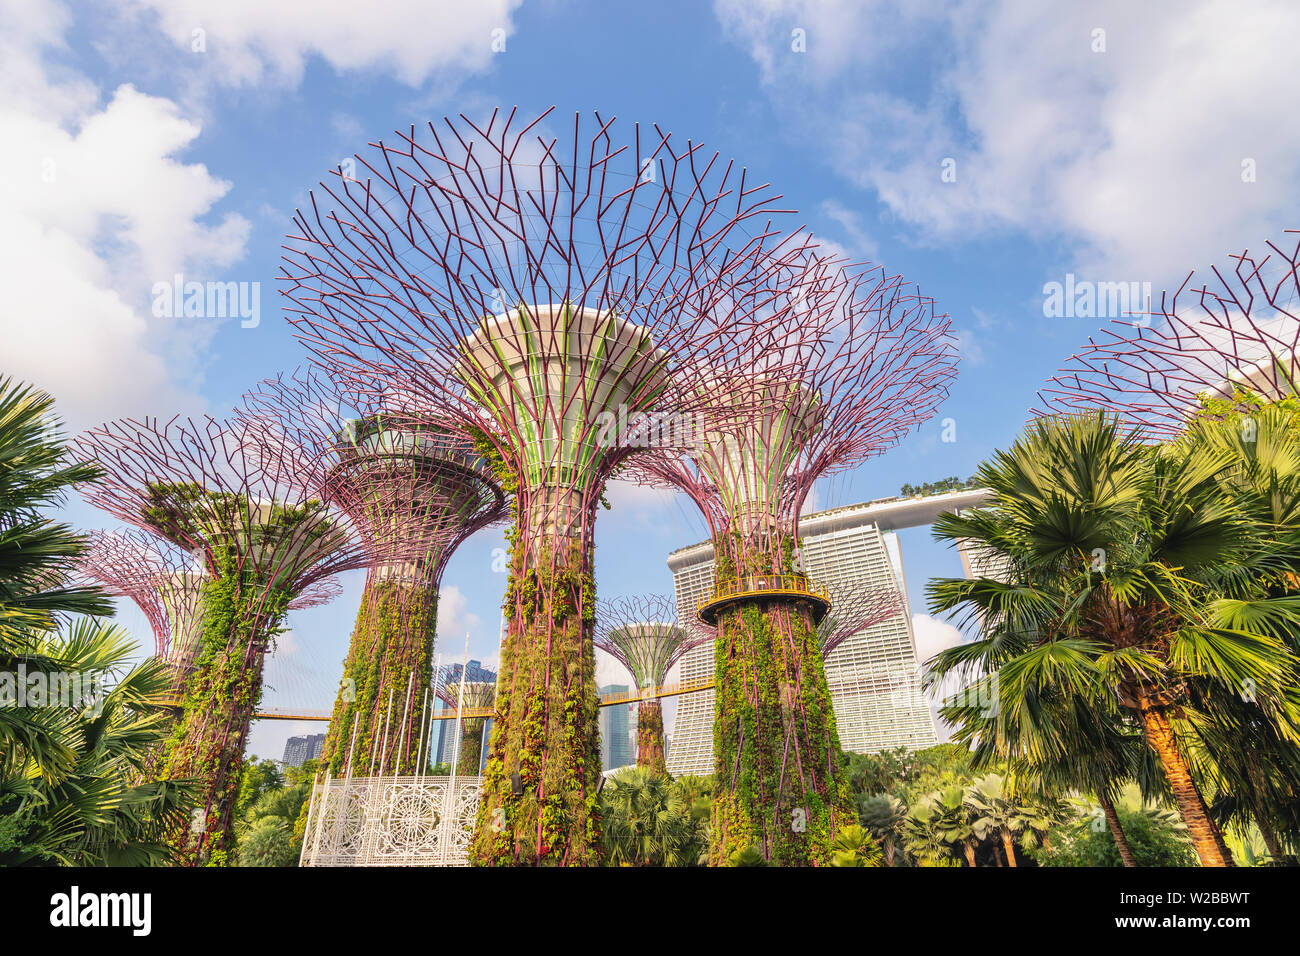 MARINA BAY, SINGAPOUR - 6 janvier 2019 : Singapore city skyline at Supertree Grove de Gardens By The Bay Banque D'Images